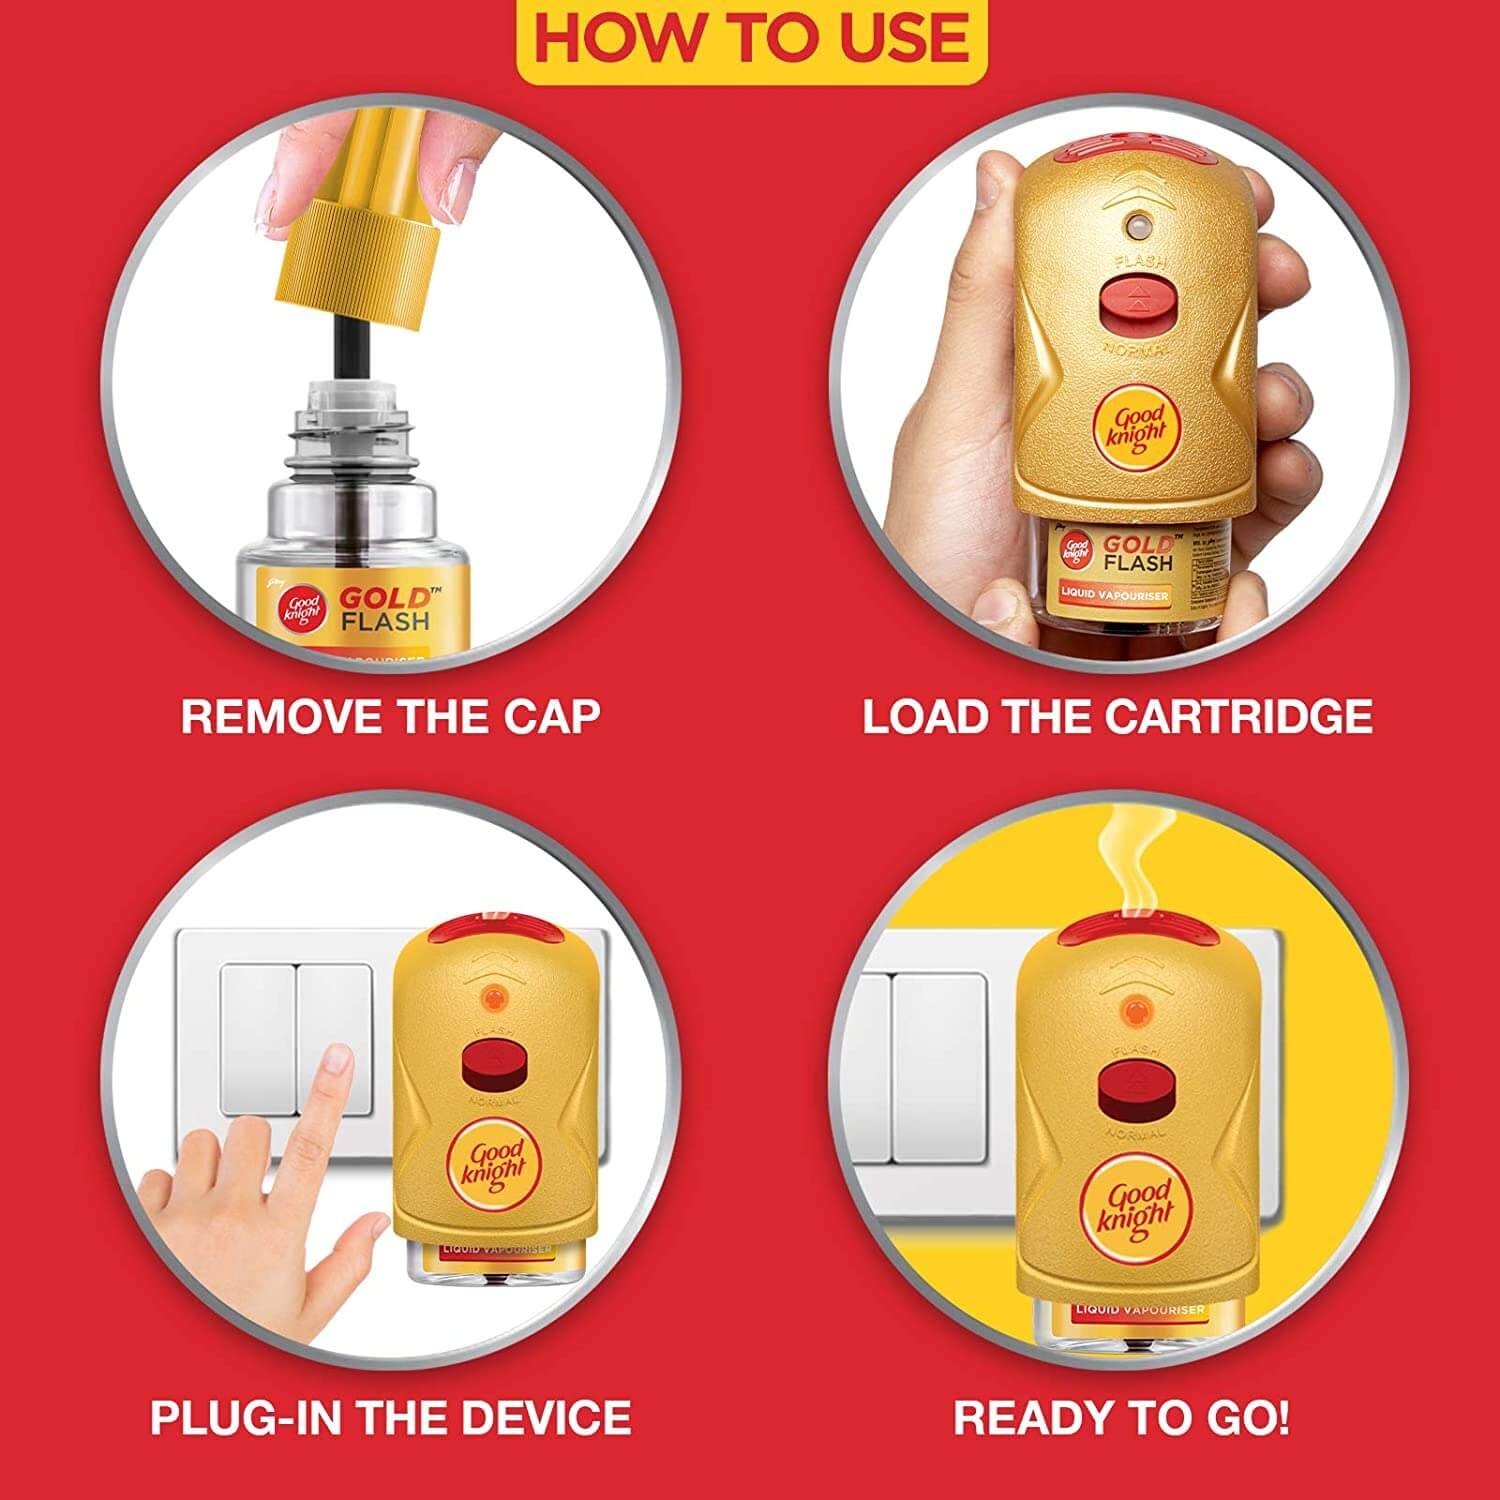 https://shoppingyatra.com/product_images/Good knight Gold Flash - Mosquito Repellent Combo Pack (Machine + 3 Refills), 4Pcs2.jpg